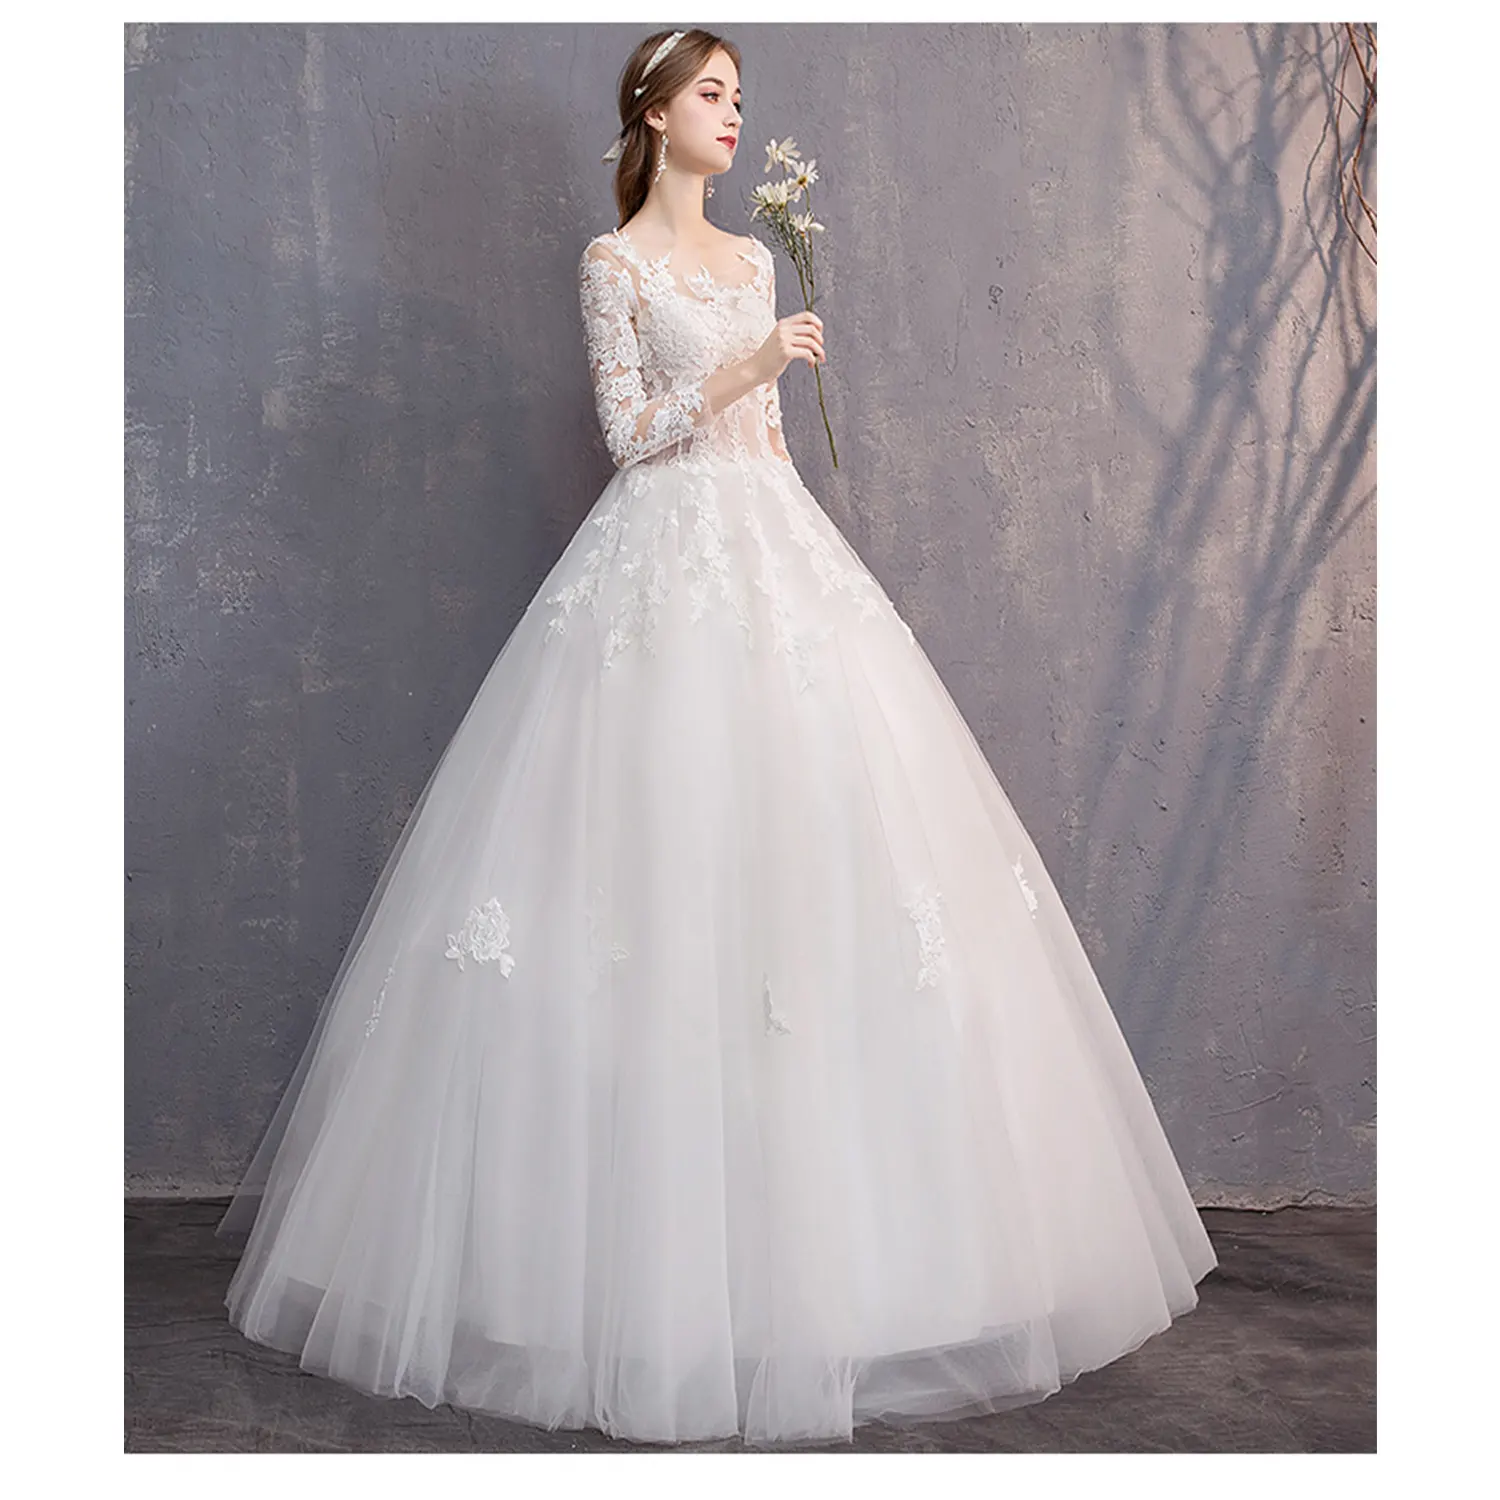 Floral Lace Wedding Dress Simple Fluffy Long Sleeve Bride Ball Gowns For Wedding Dresses